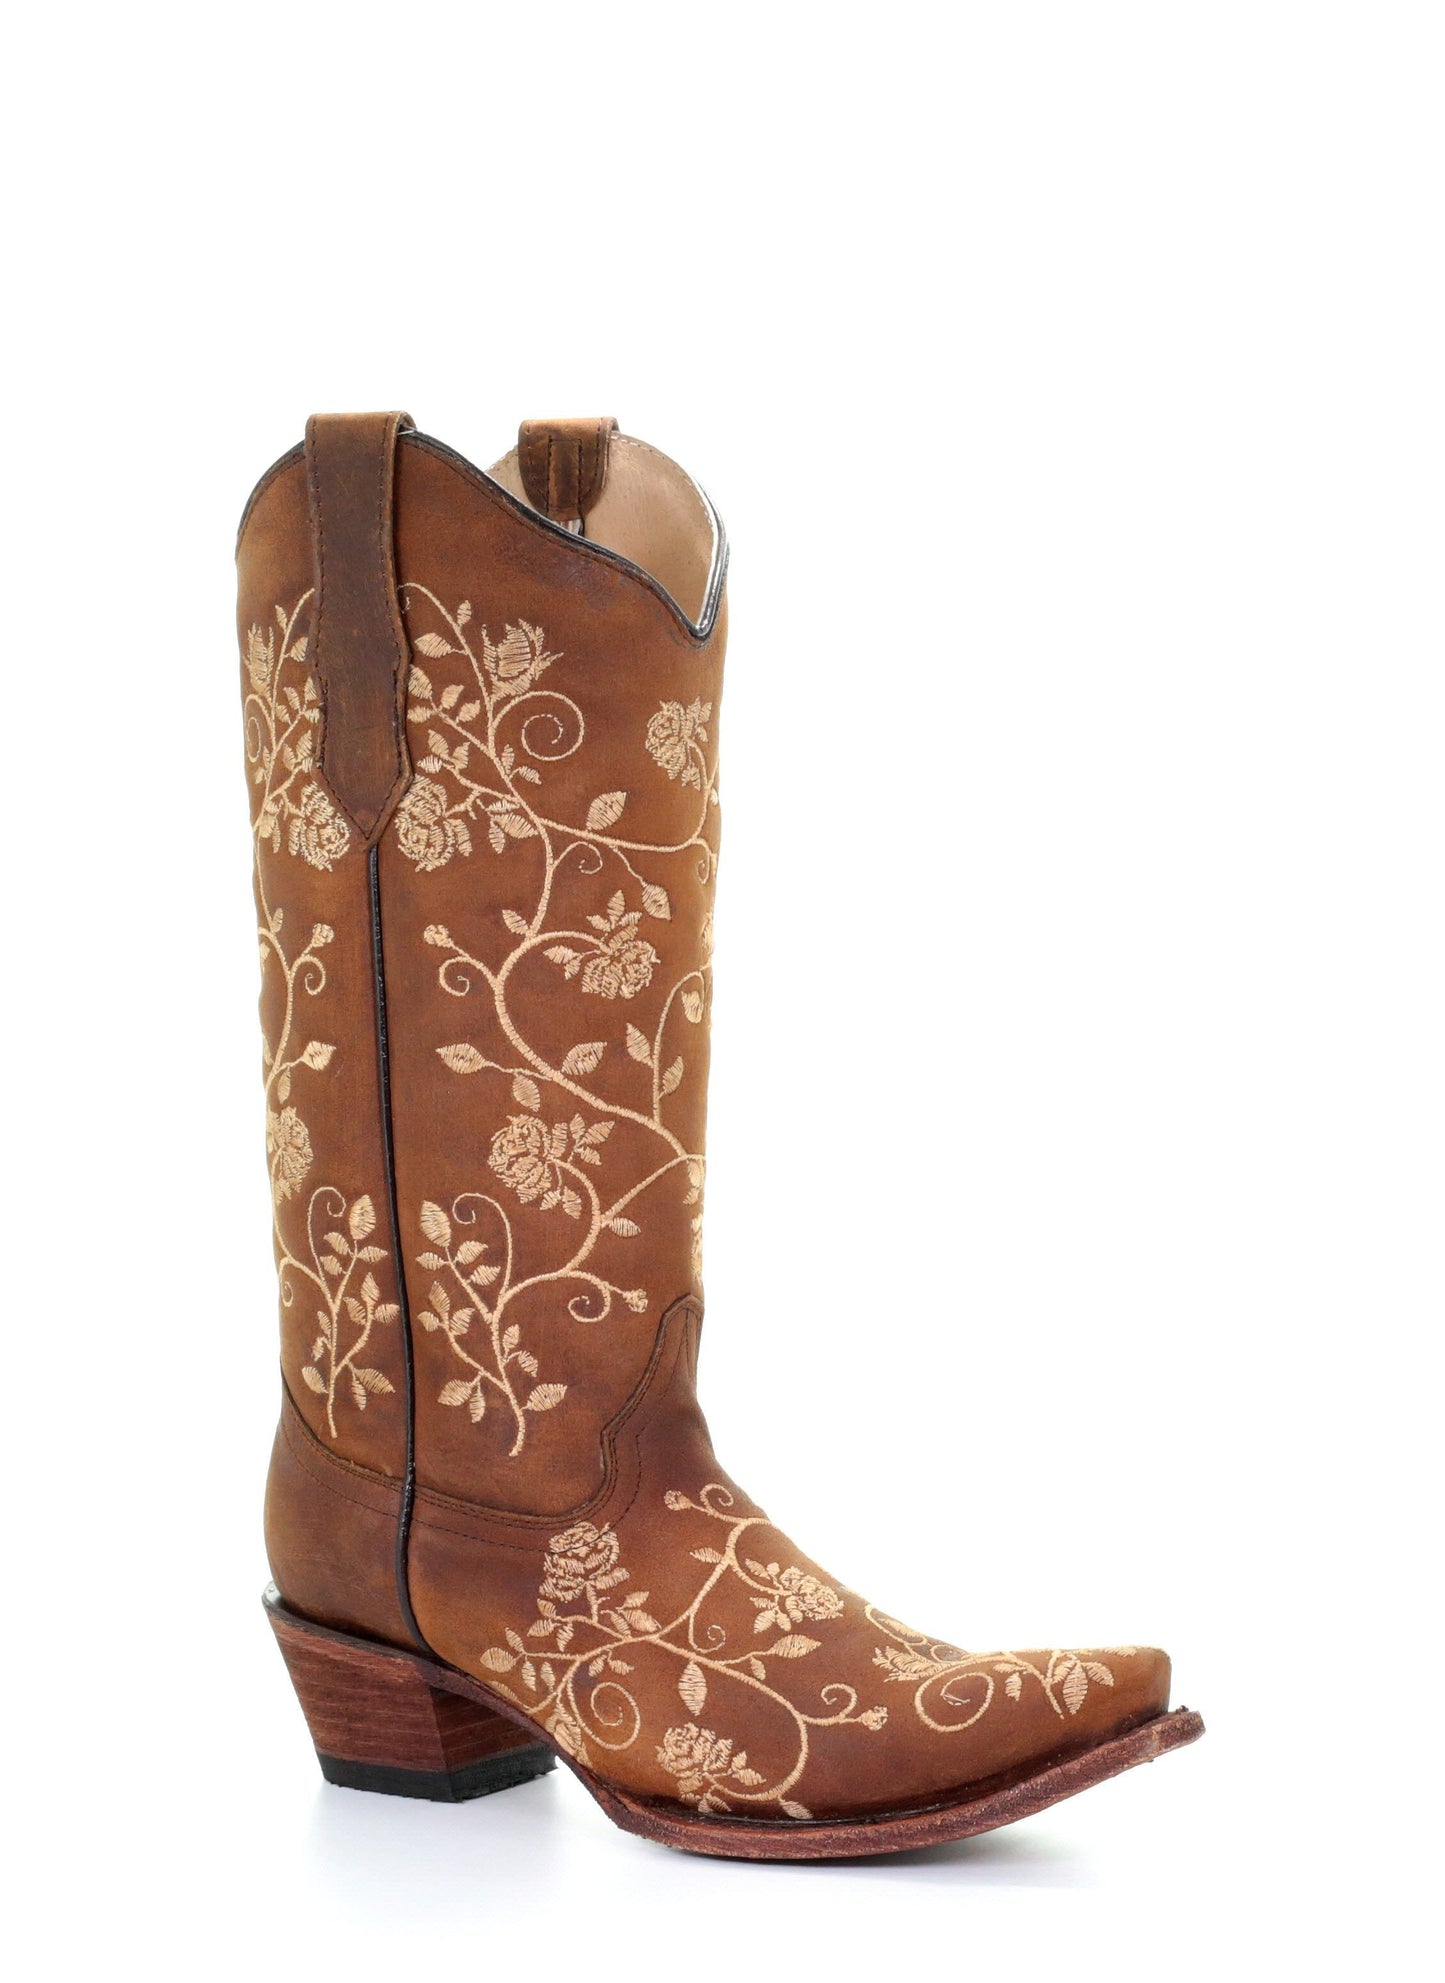 L5443 Circle G by Corral Boots Women's Straw Floral Embroidery Snip Toe Boot